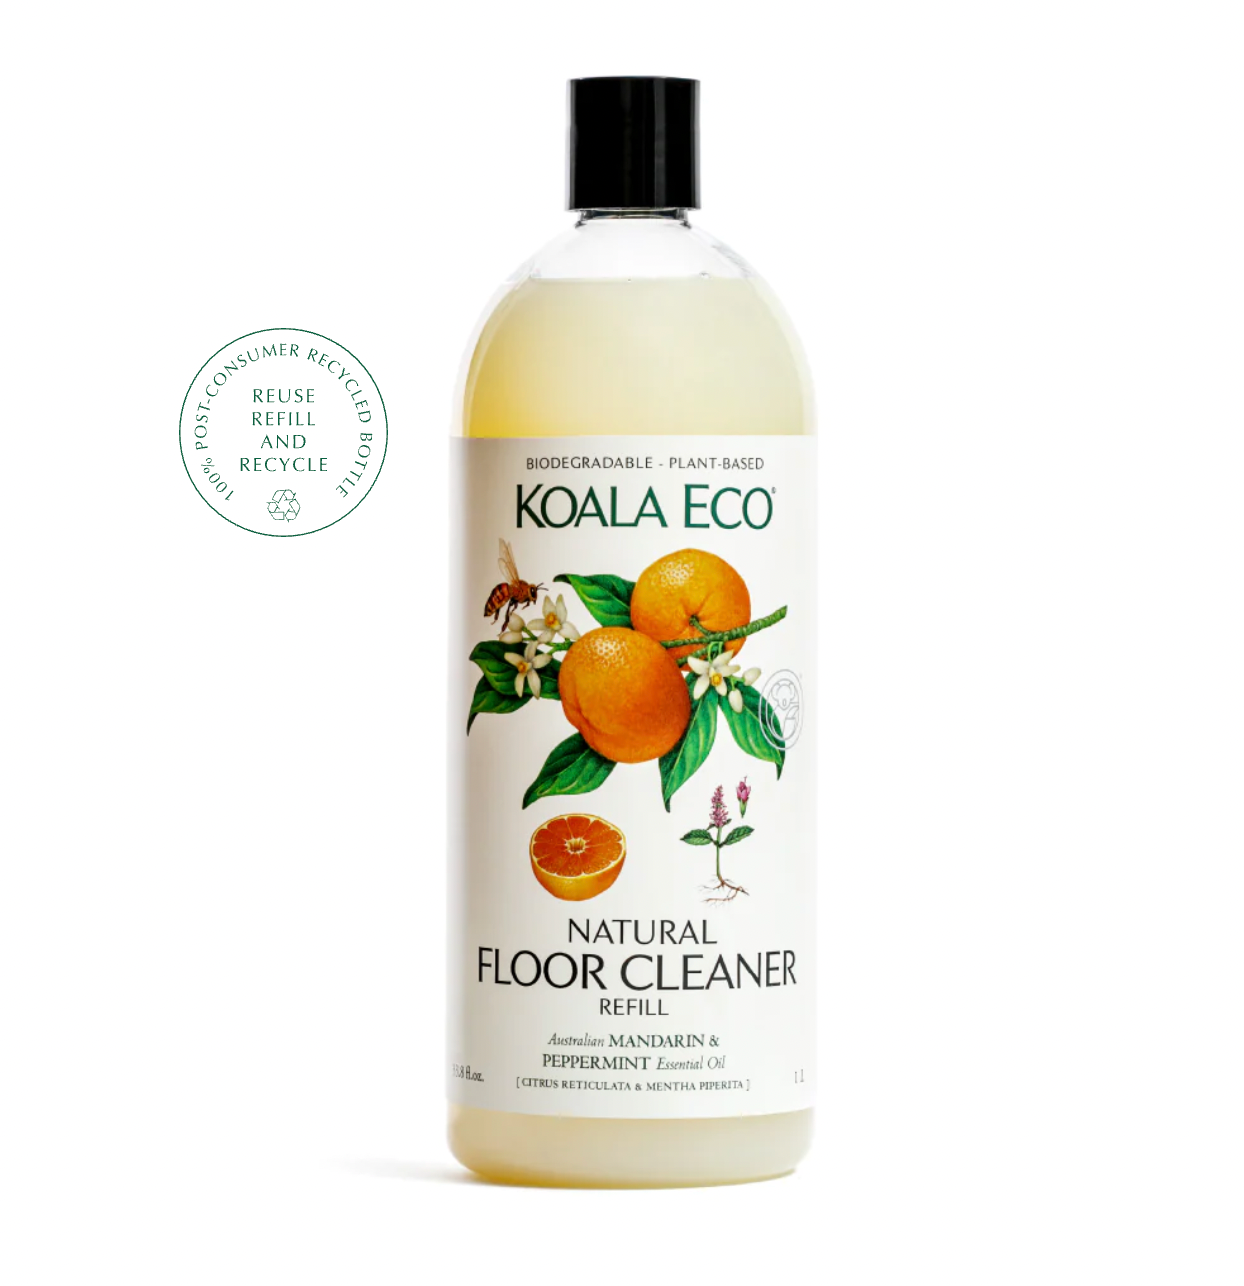 Natural Floor Cleaner Our Mandarin & Peppermint Floor Cleaner combines nature’s most aromatic antiseptics in one powerful, anti-bacterial formula.